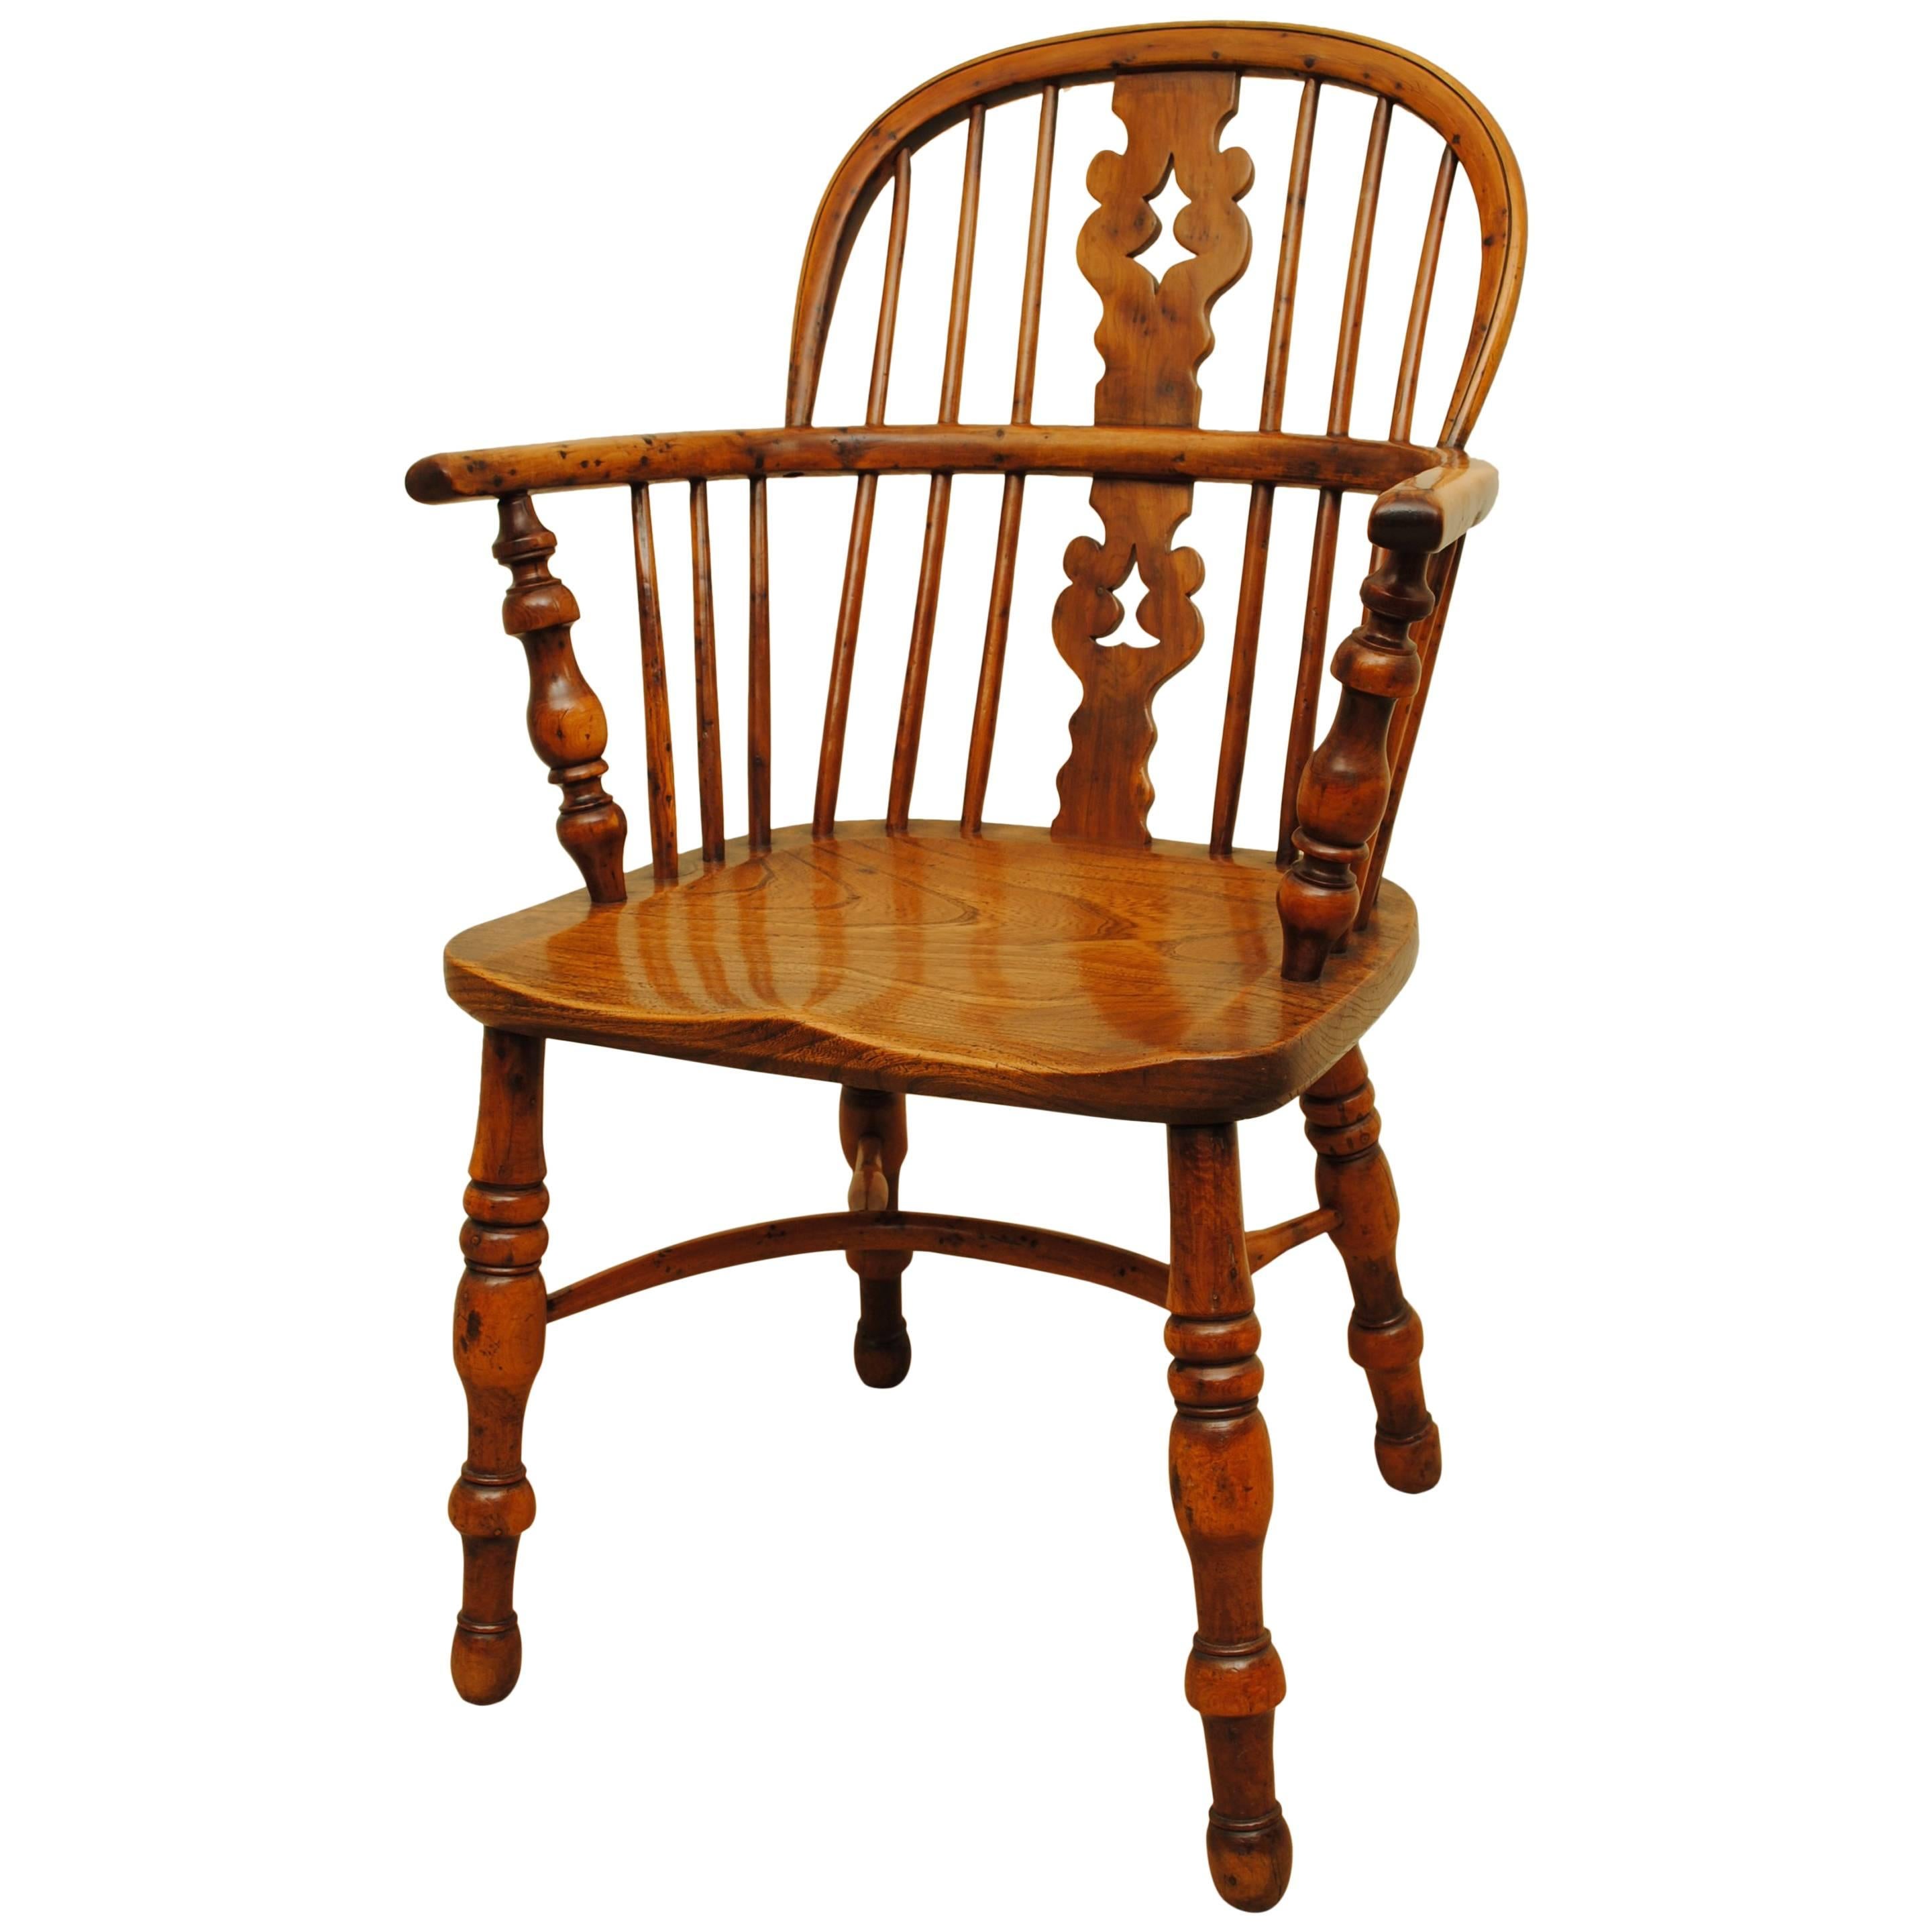 Good Example of a Yew Wood Windsor Chair